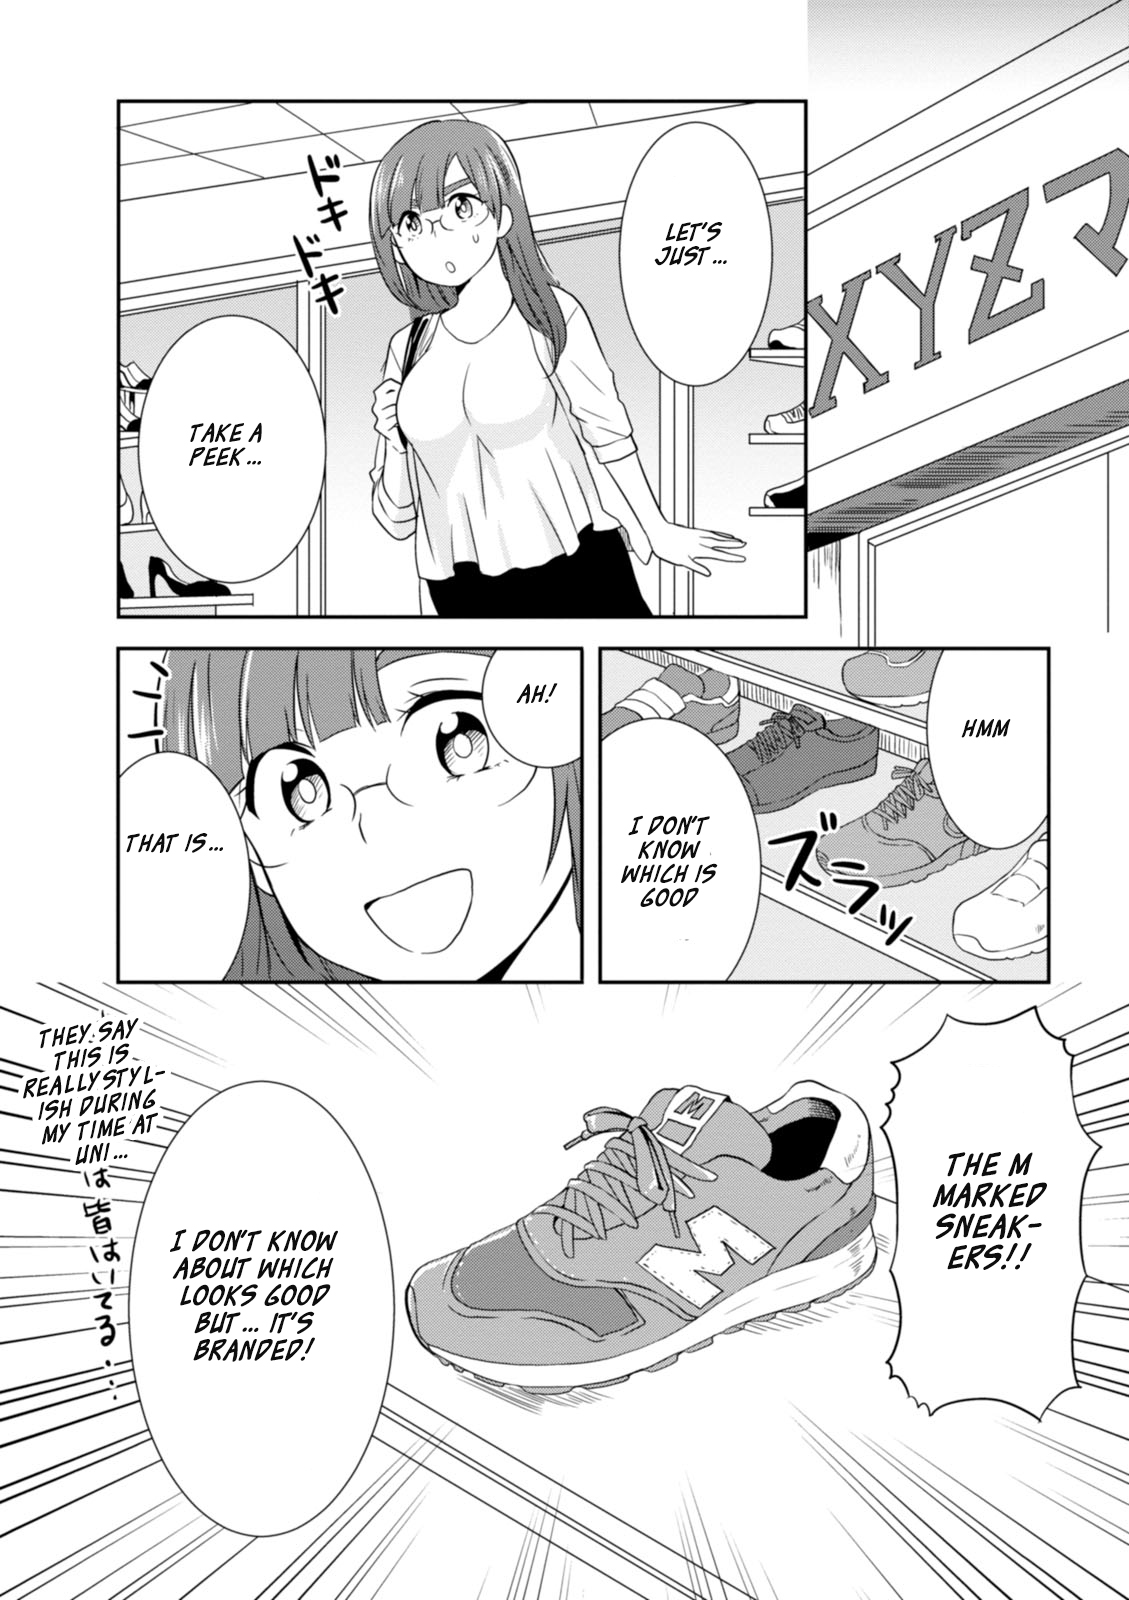 Hime No Dameshi Vol. 2 Ch. 16 Hime and diet